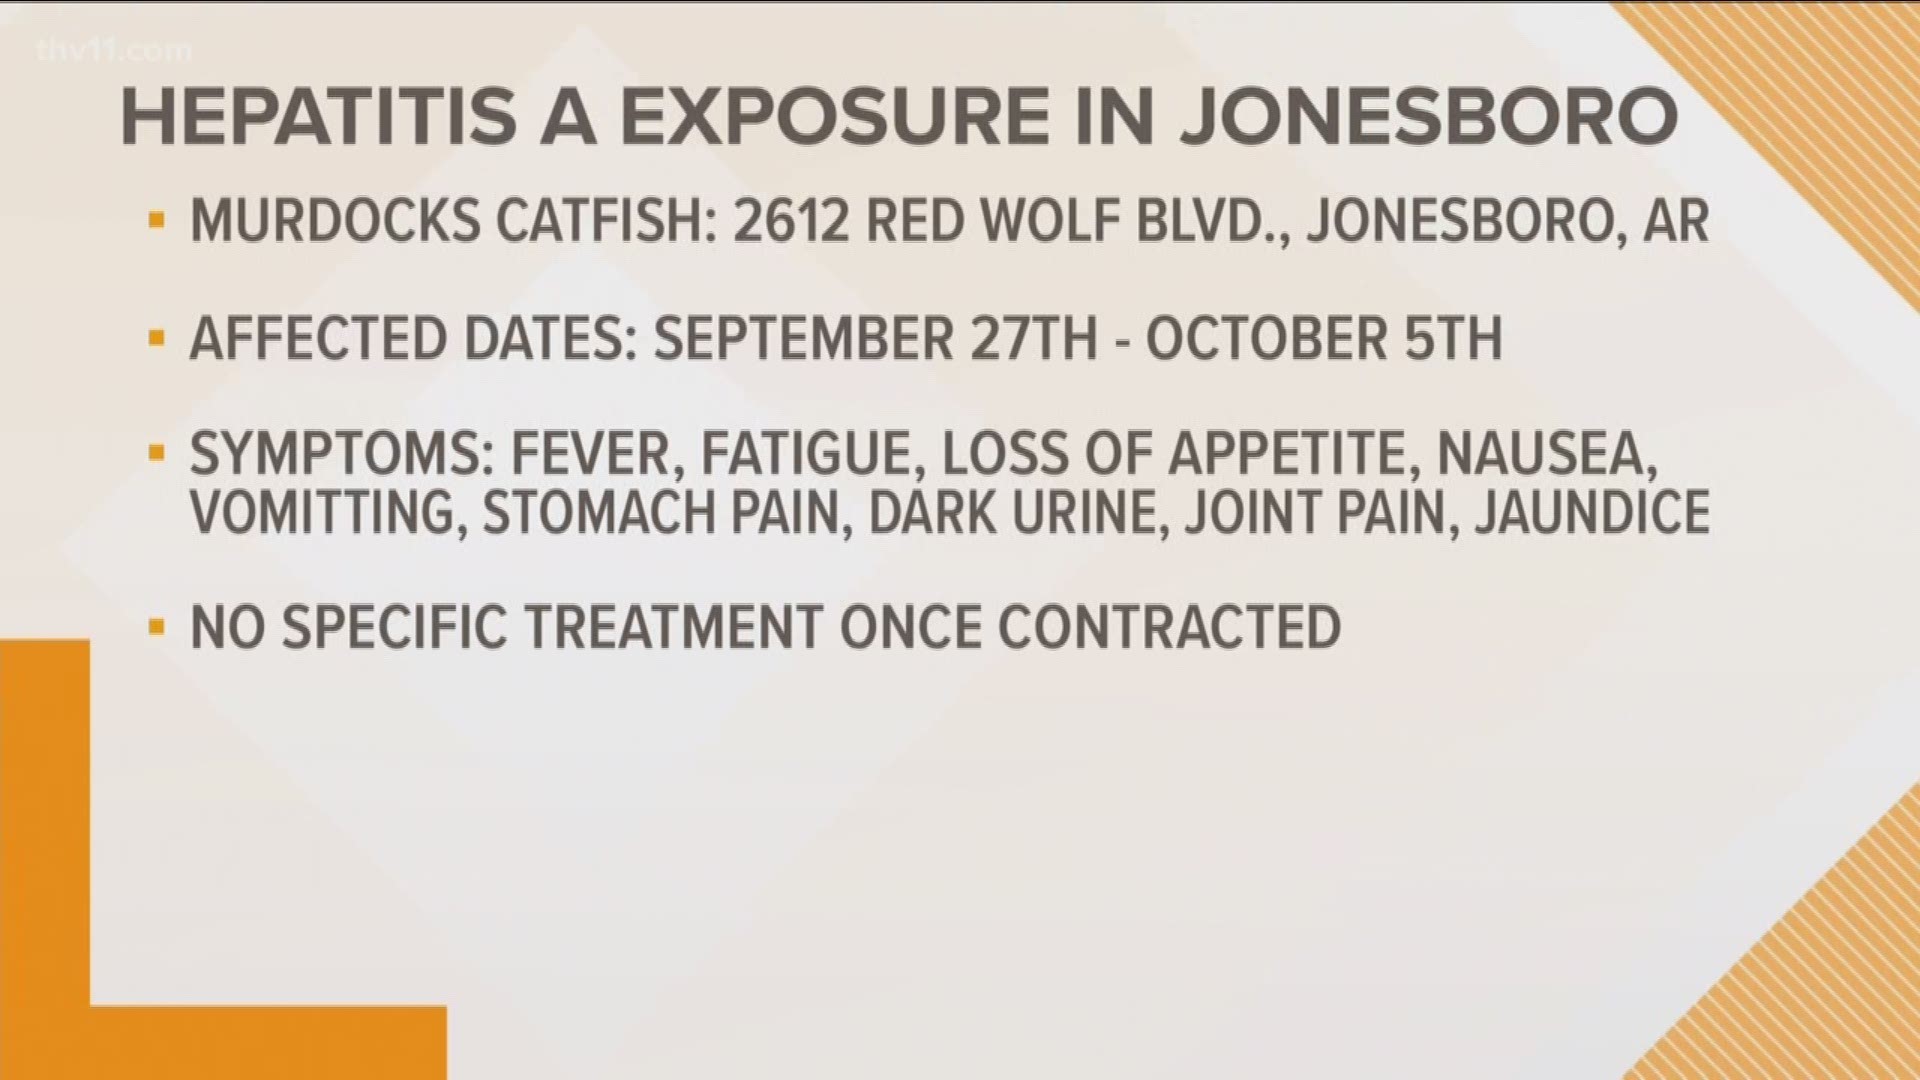 The State Department of Health is warning of a possible exposure, after an employee of Murdock's catfish in Jonesboro tested positive for the virus.